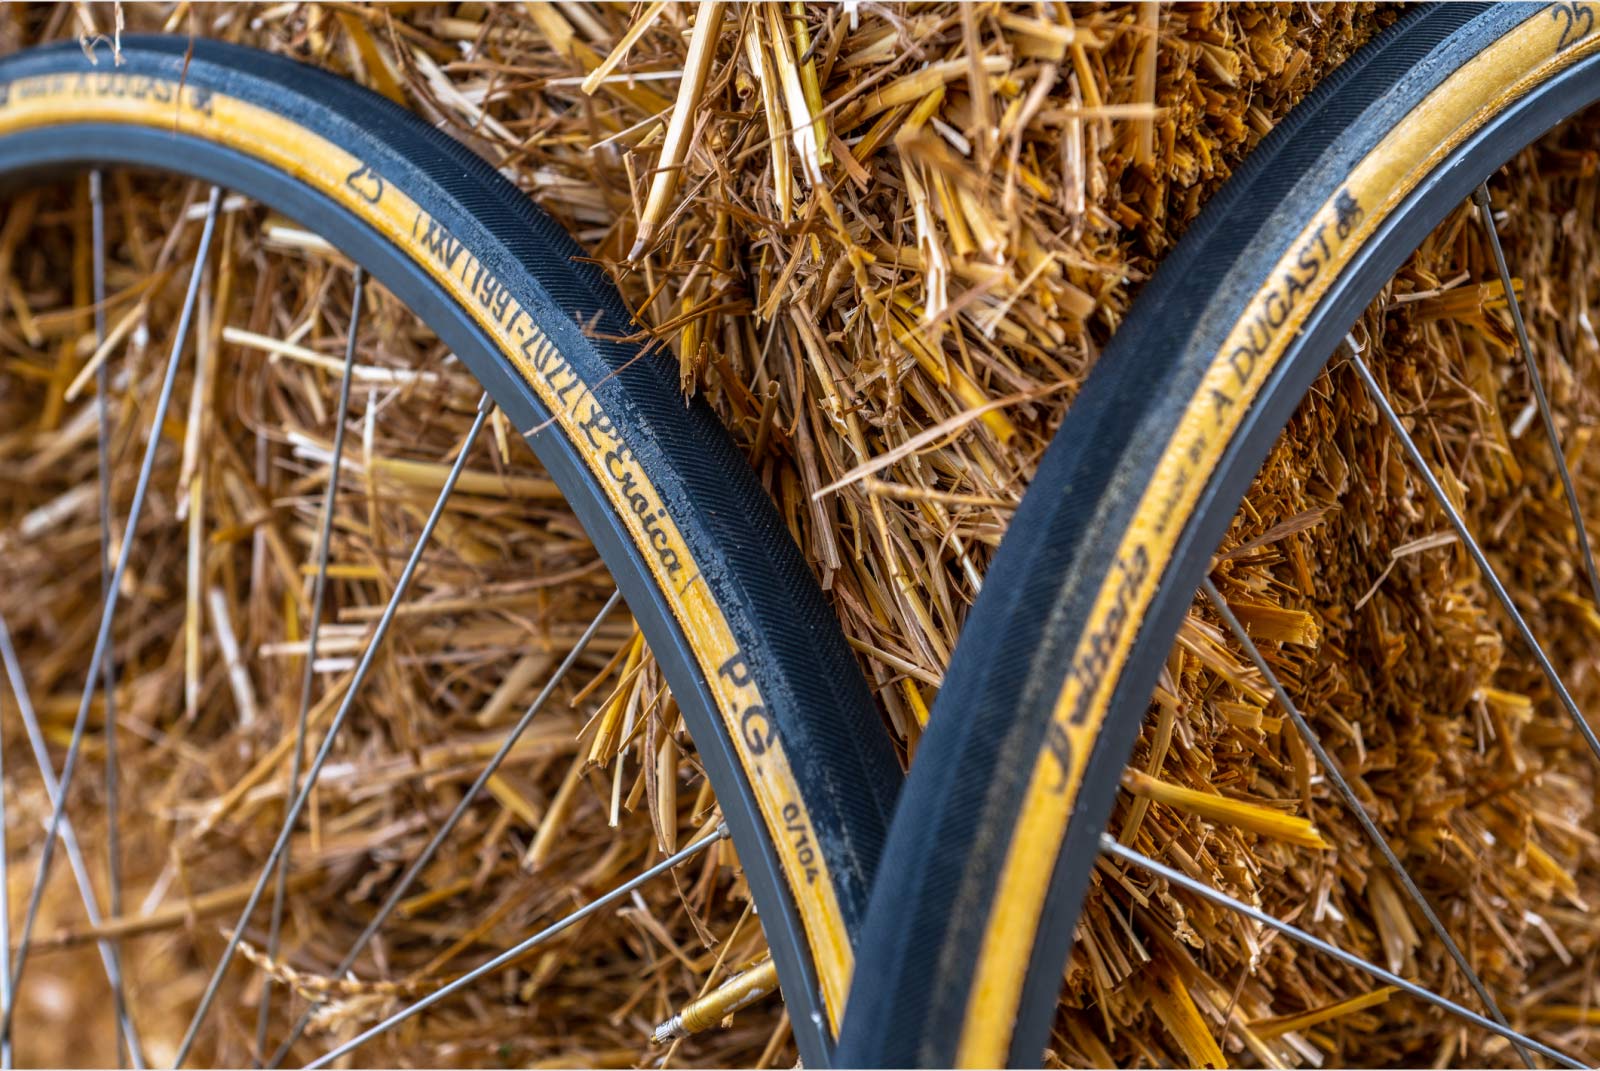 limited edition l'eroica vittoria tubular tires made by a dugast